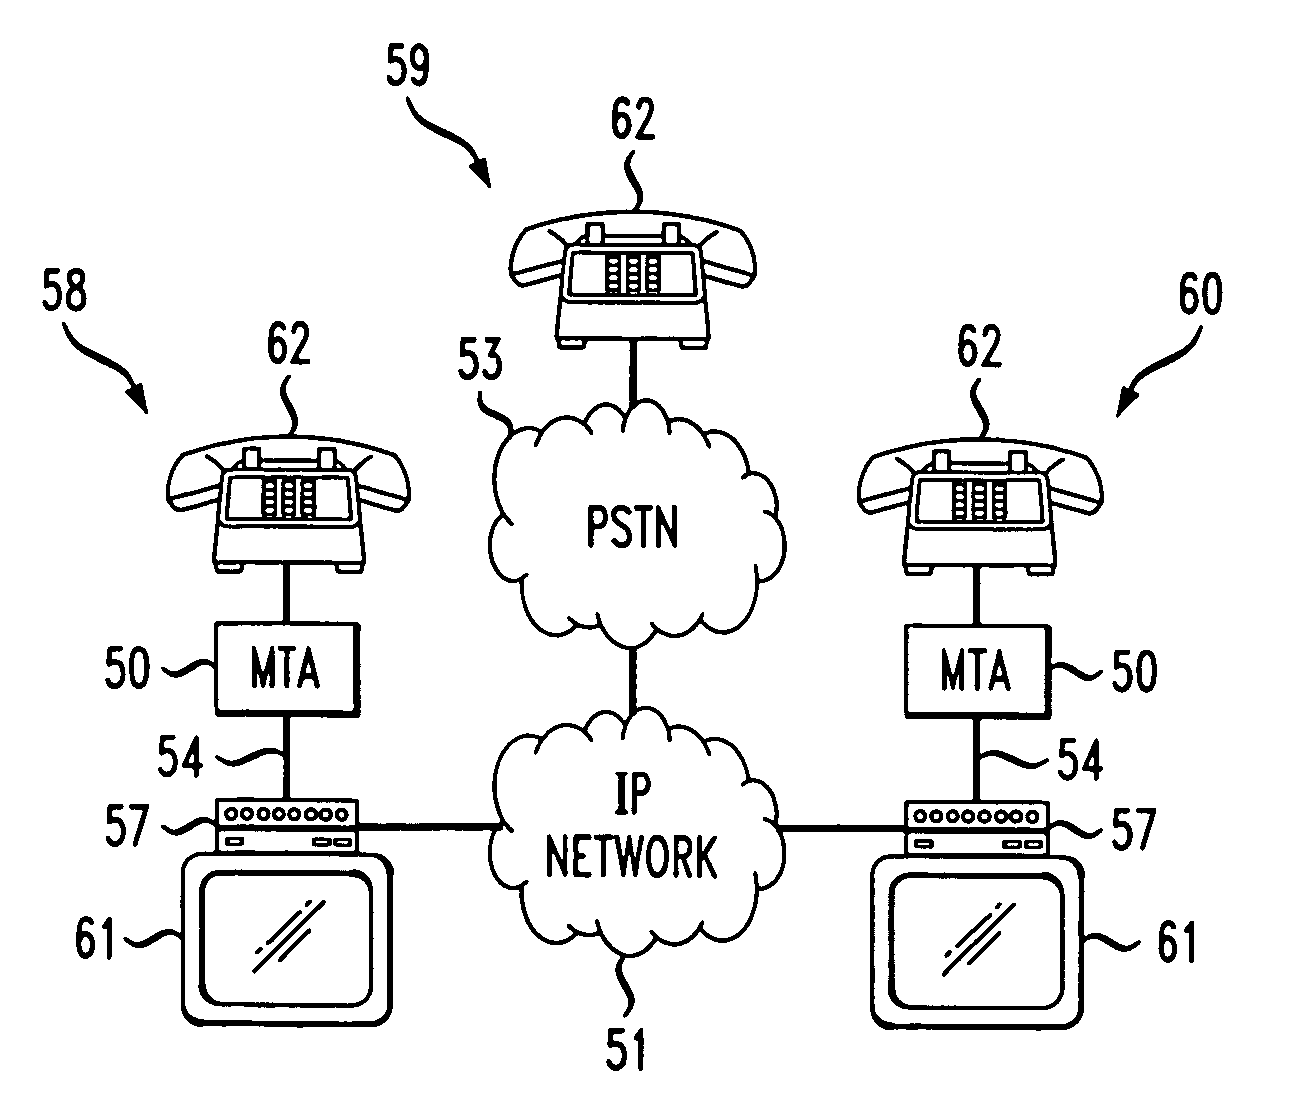 Method and device for providing speech-to-text encoding and telephony service